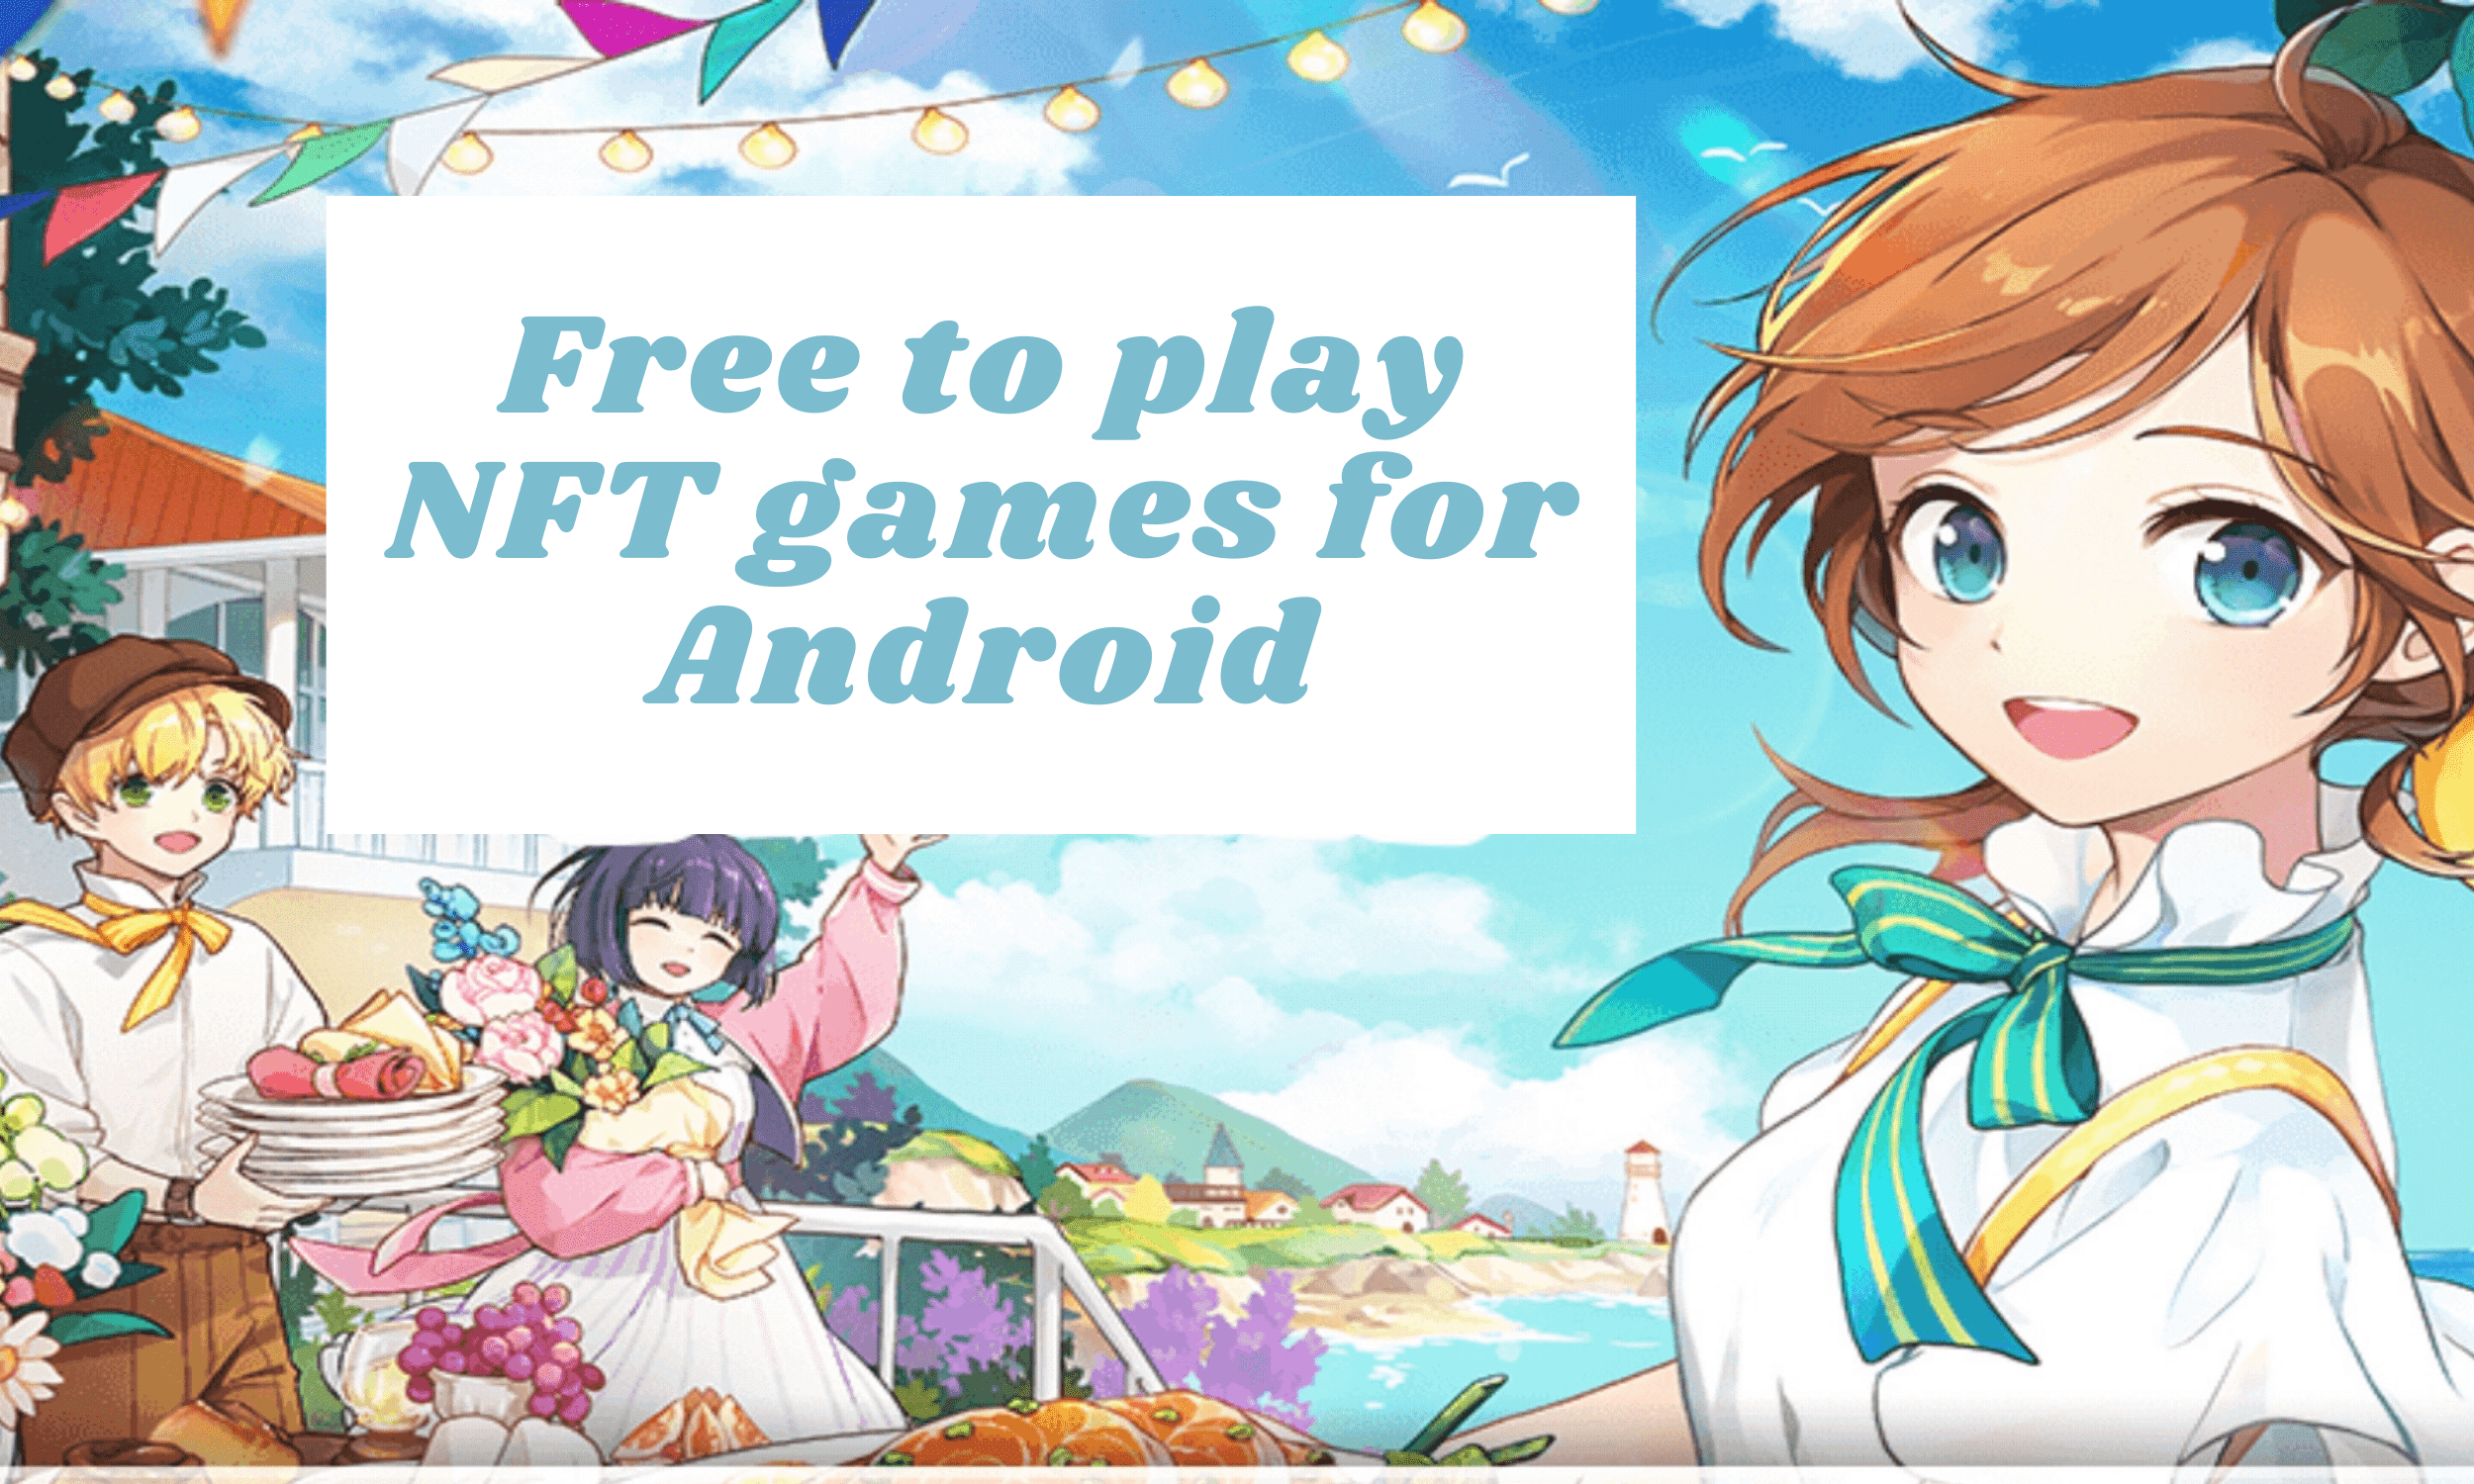 Free to play NFT games for Android